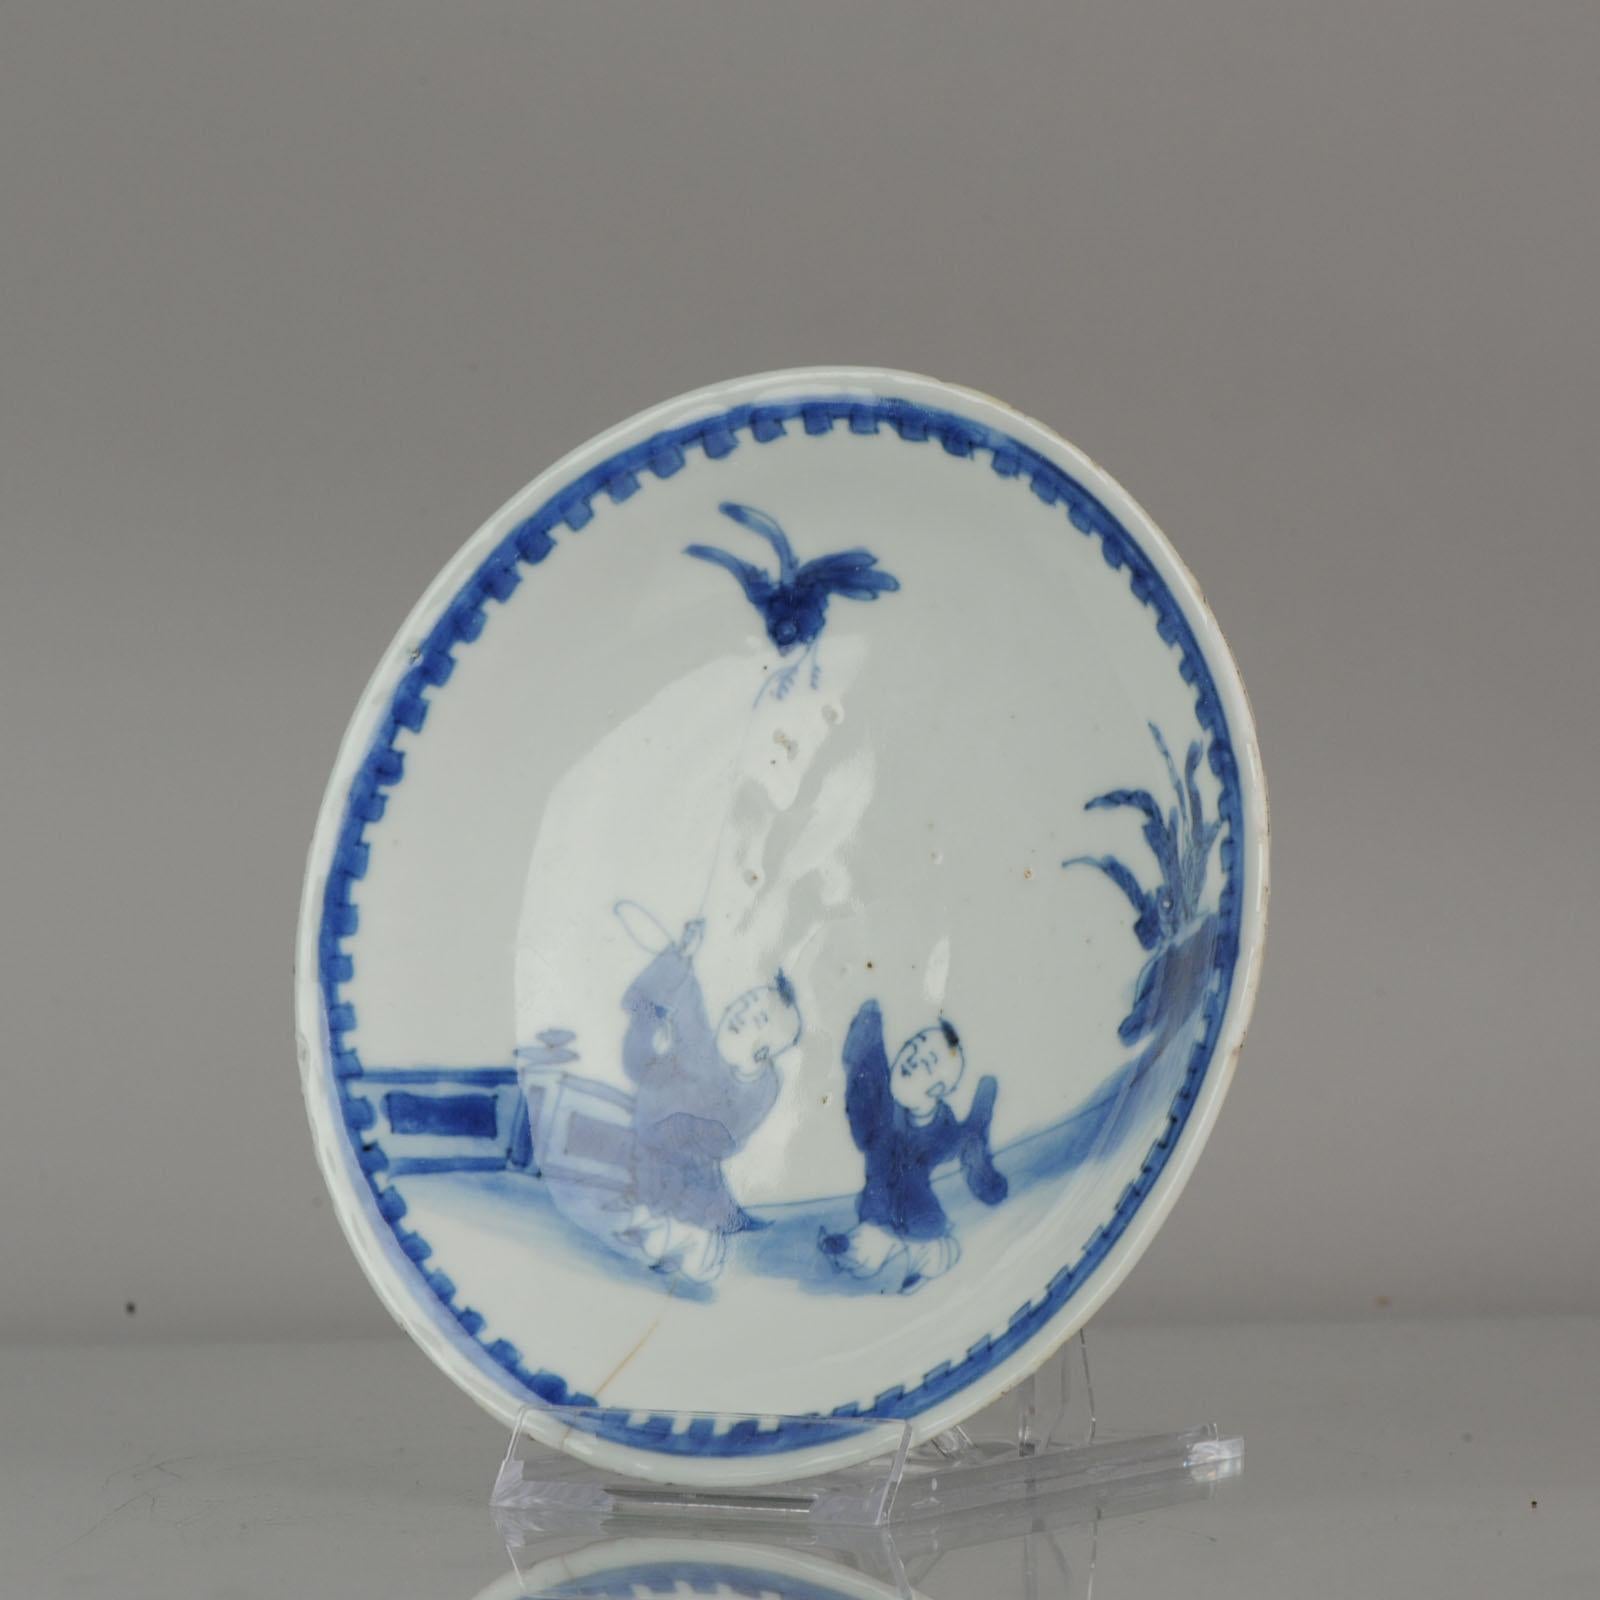 A very nicely decorated plate.
A late Ming Ko-Sometsuke porcelain dish, Wanli or Tianqi period, 1600-1627.
This Kaiseki blue and white porcelain serving dish is decorated with two boys that hold a bird on a string.

Condition:
Overall condition